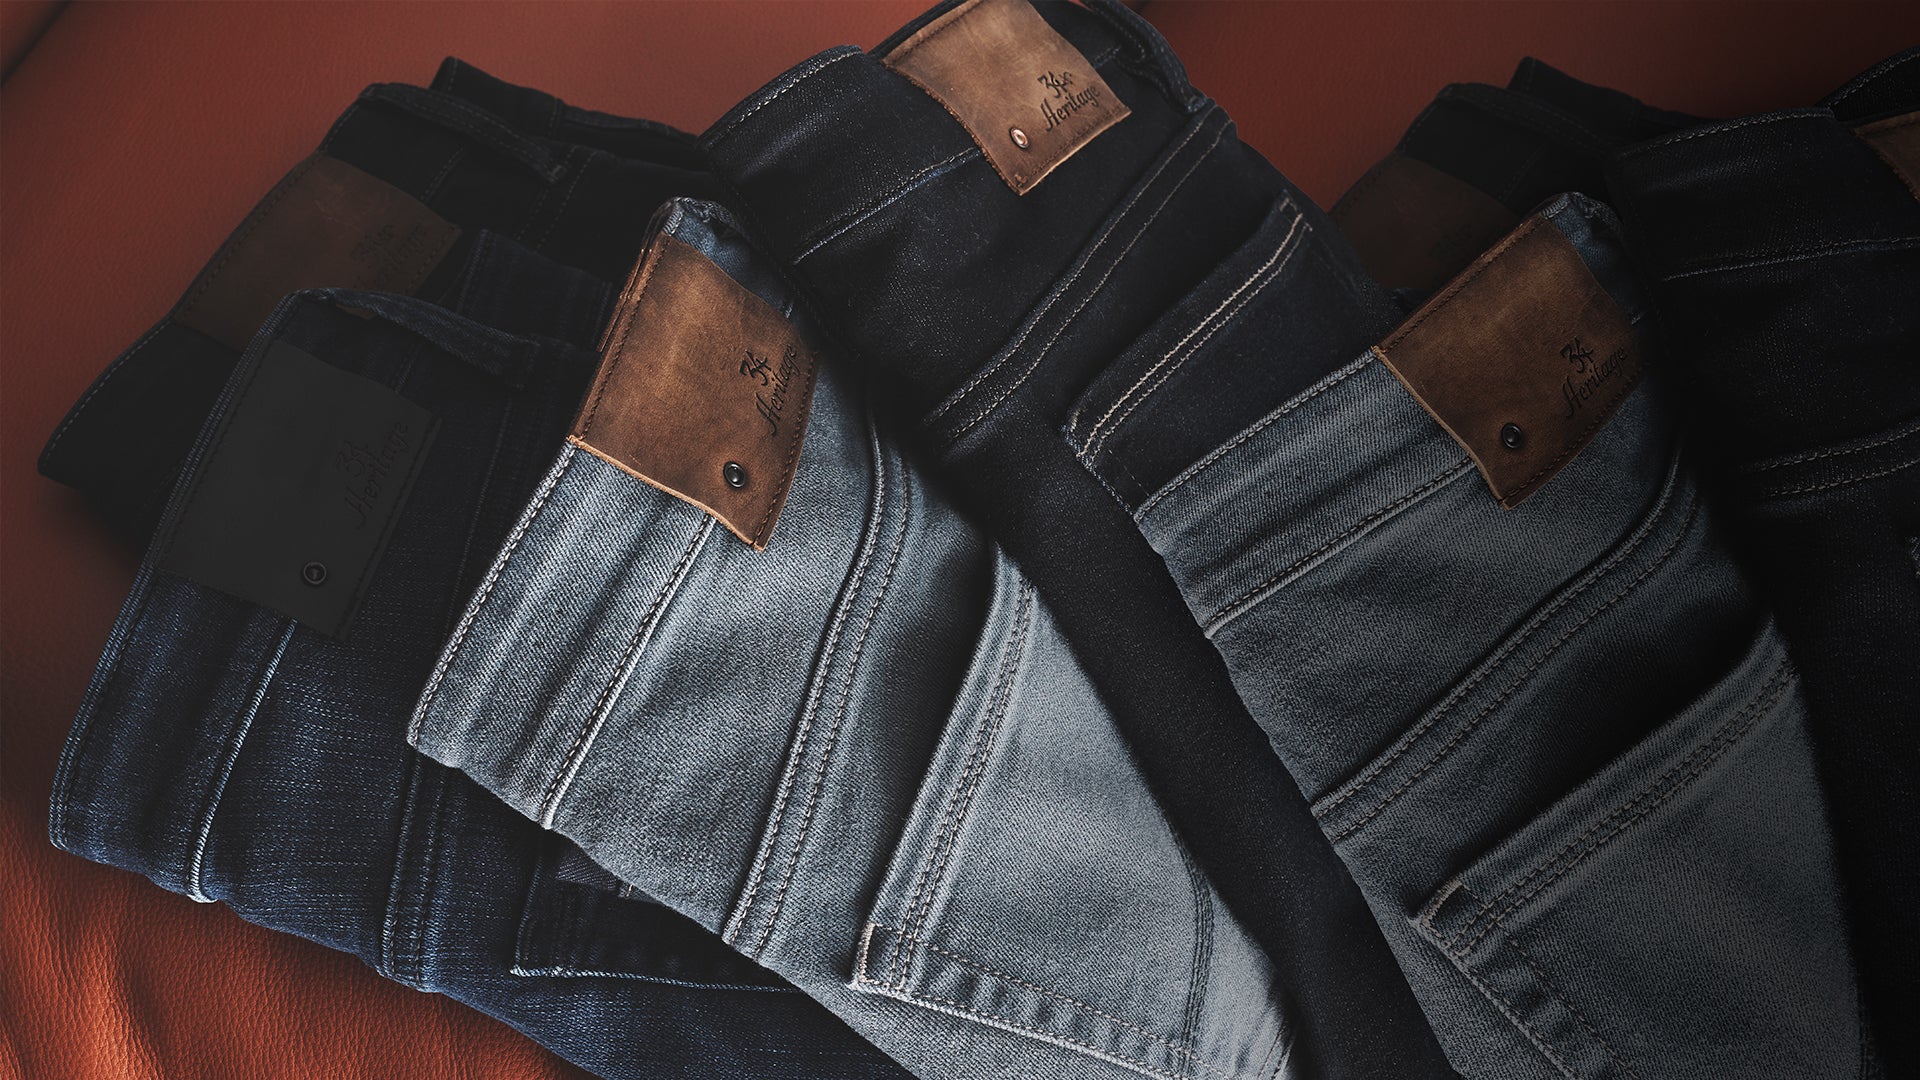 Jeans for Older Men That Don't Feel Dated